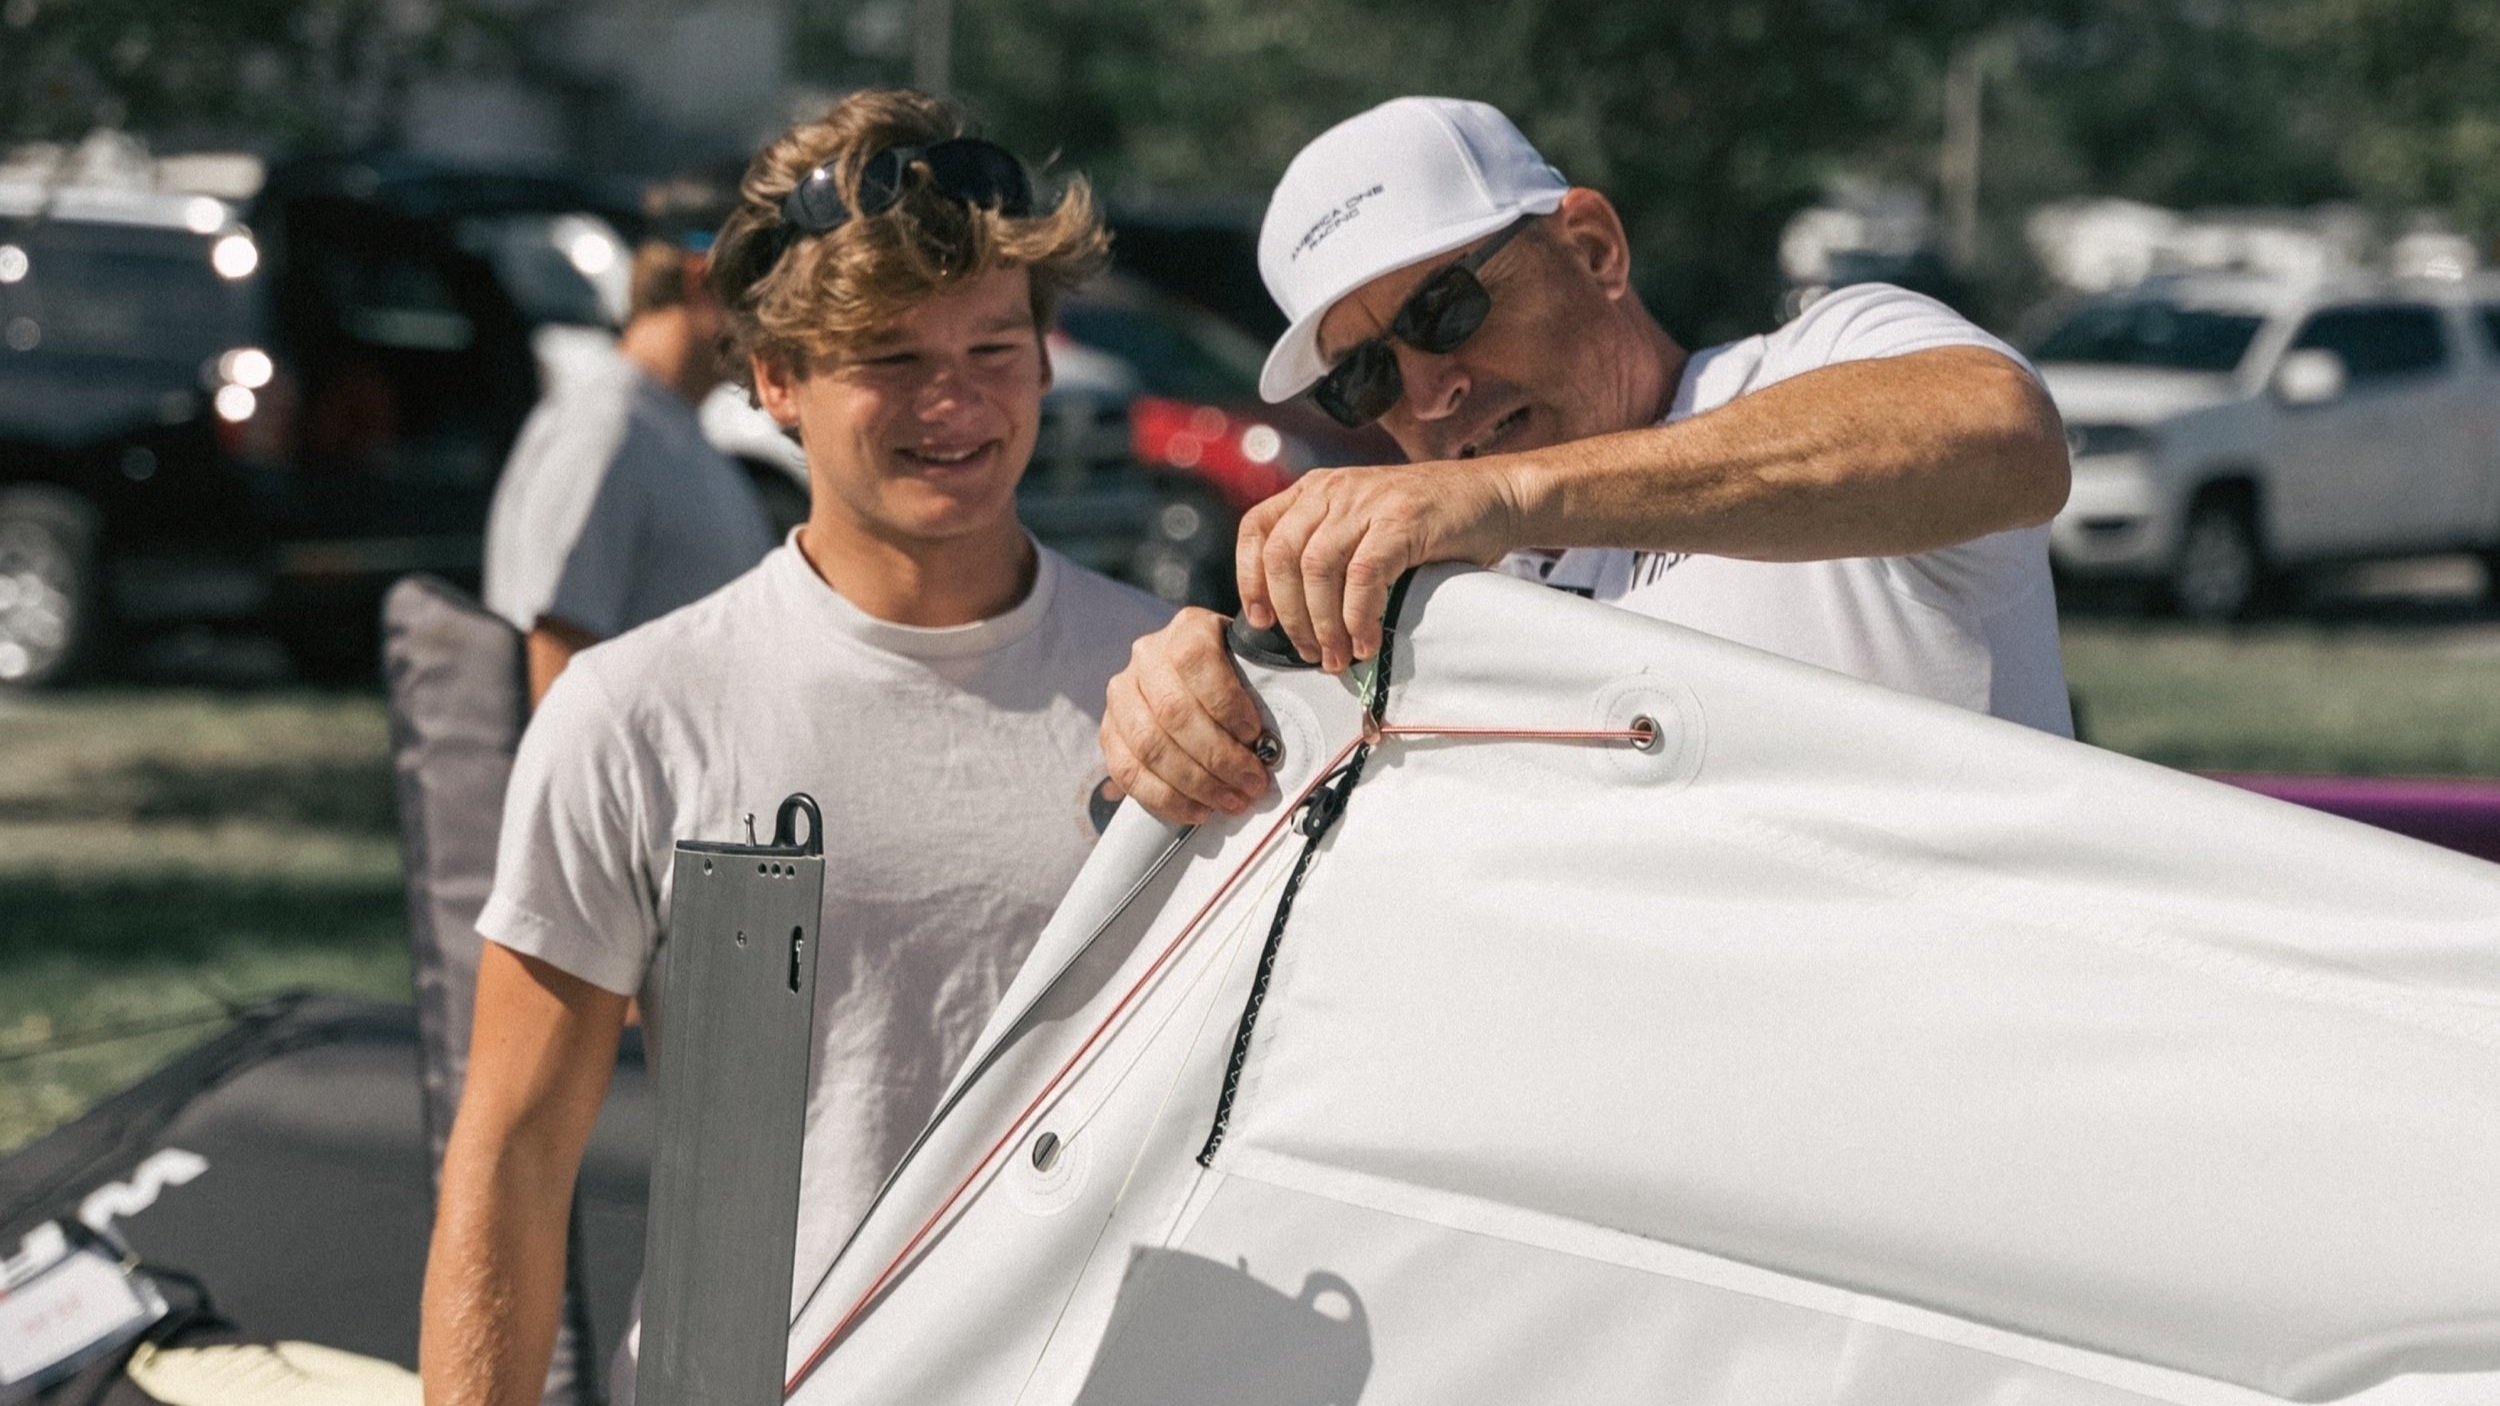 America One Racing Foiling Camp